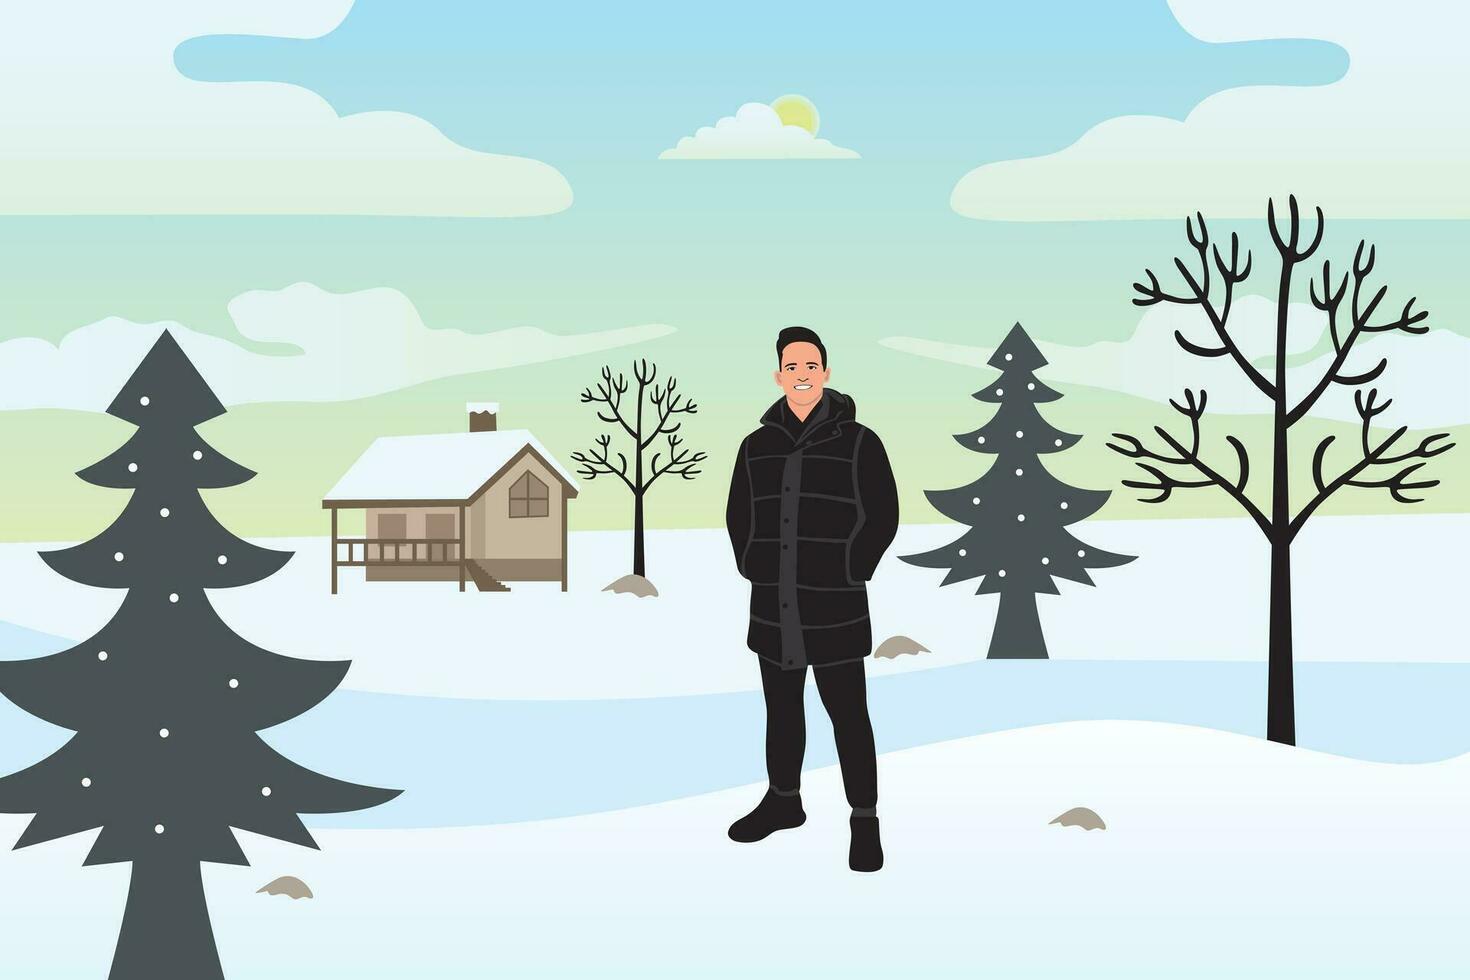 Winter landscape with a man and a house. Vector illustration in flat style.